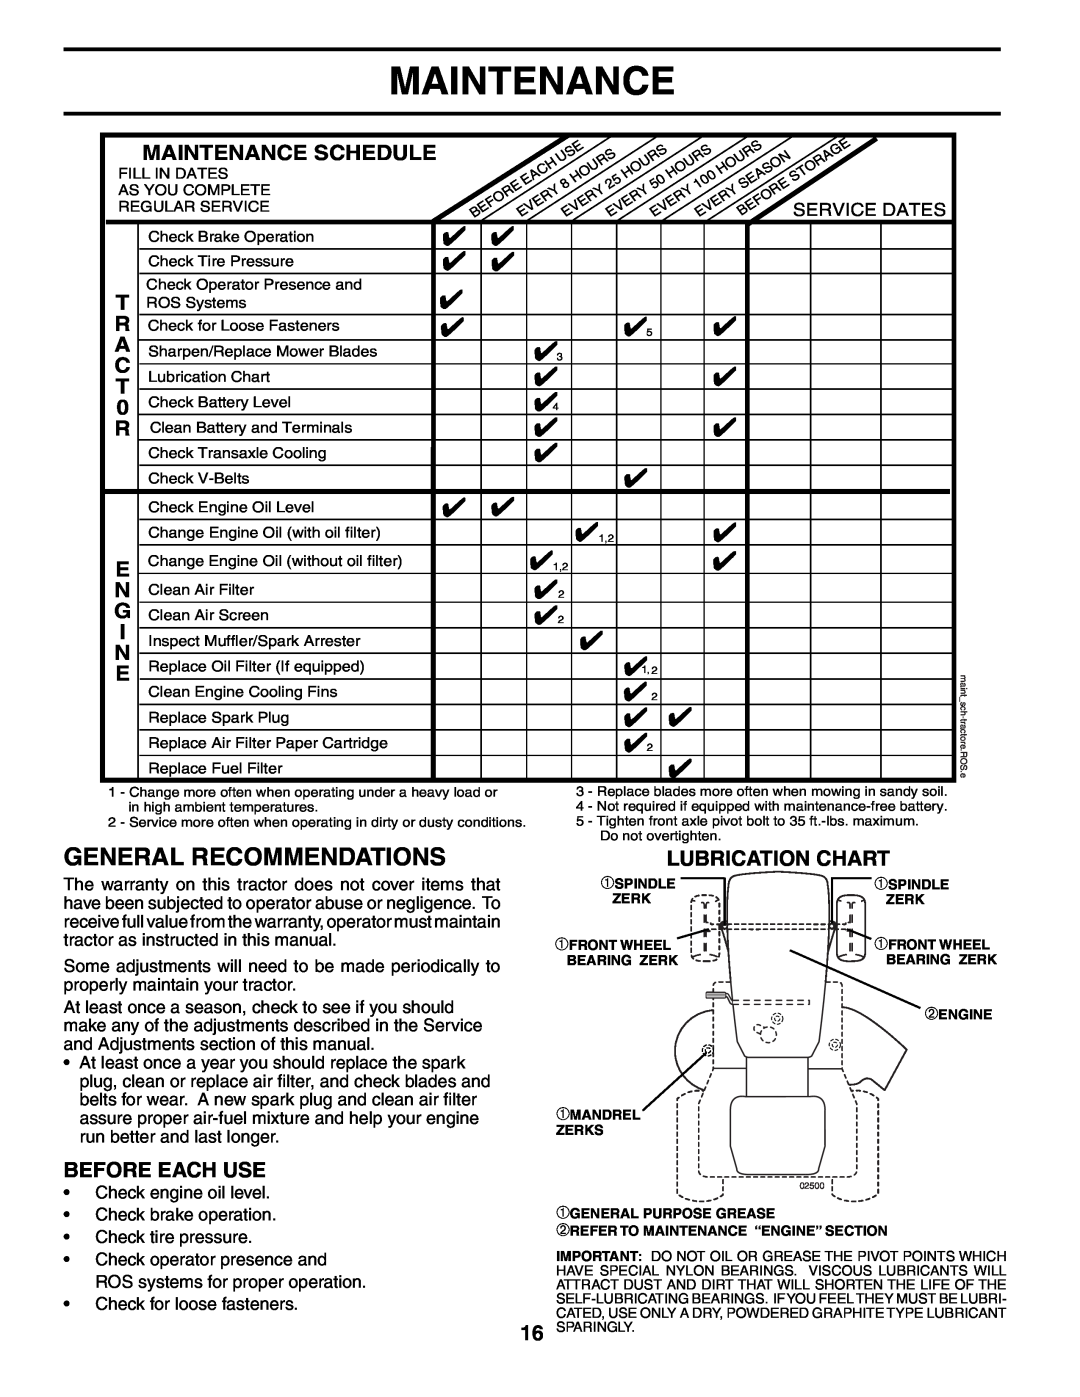 Poulan 195032 manual General Recommendations, Lubrication Chart, Before Each Use, Maintenance Schedule 